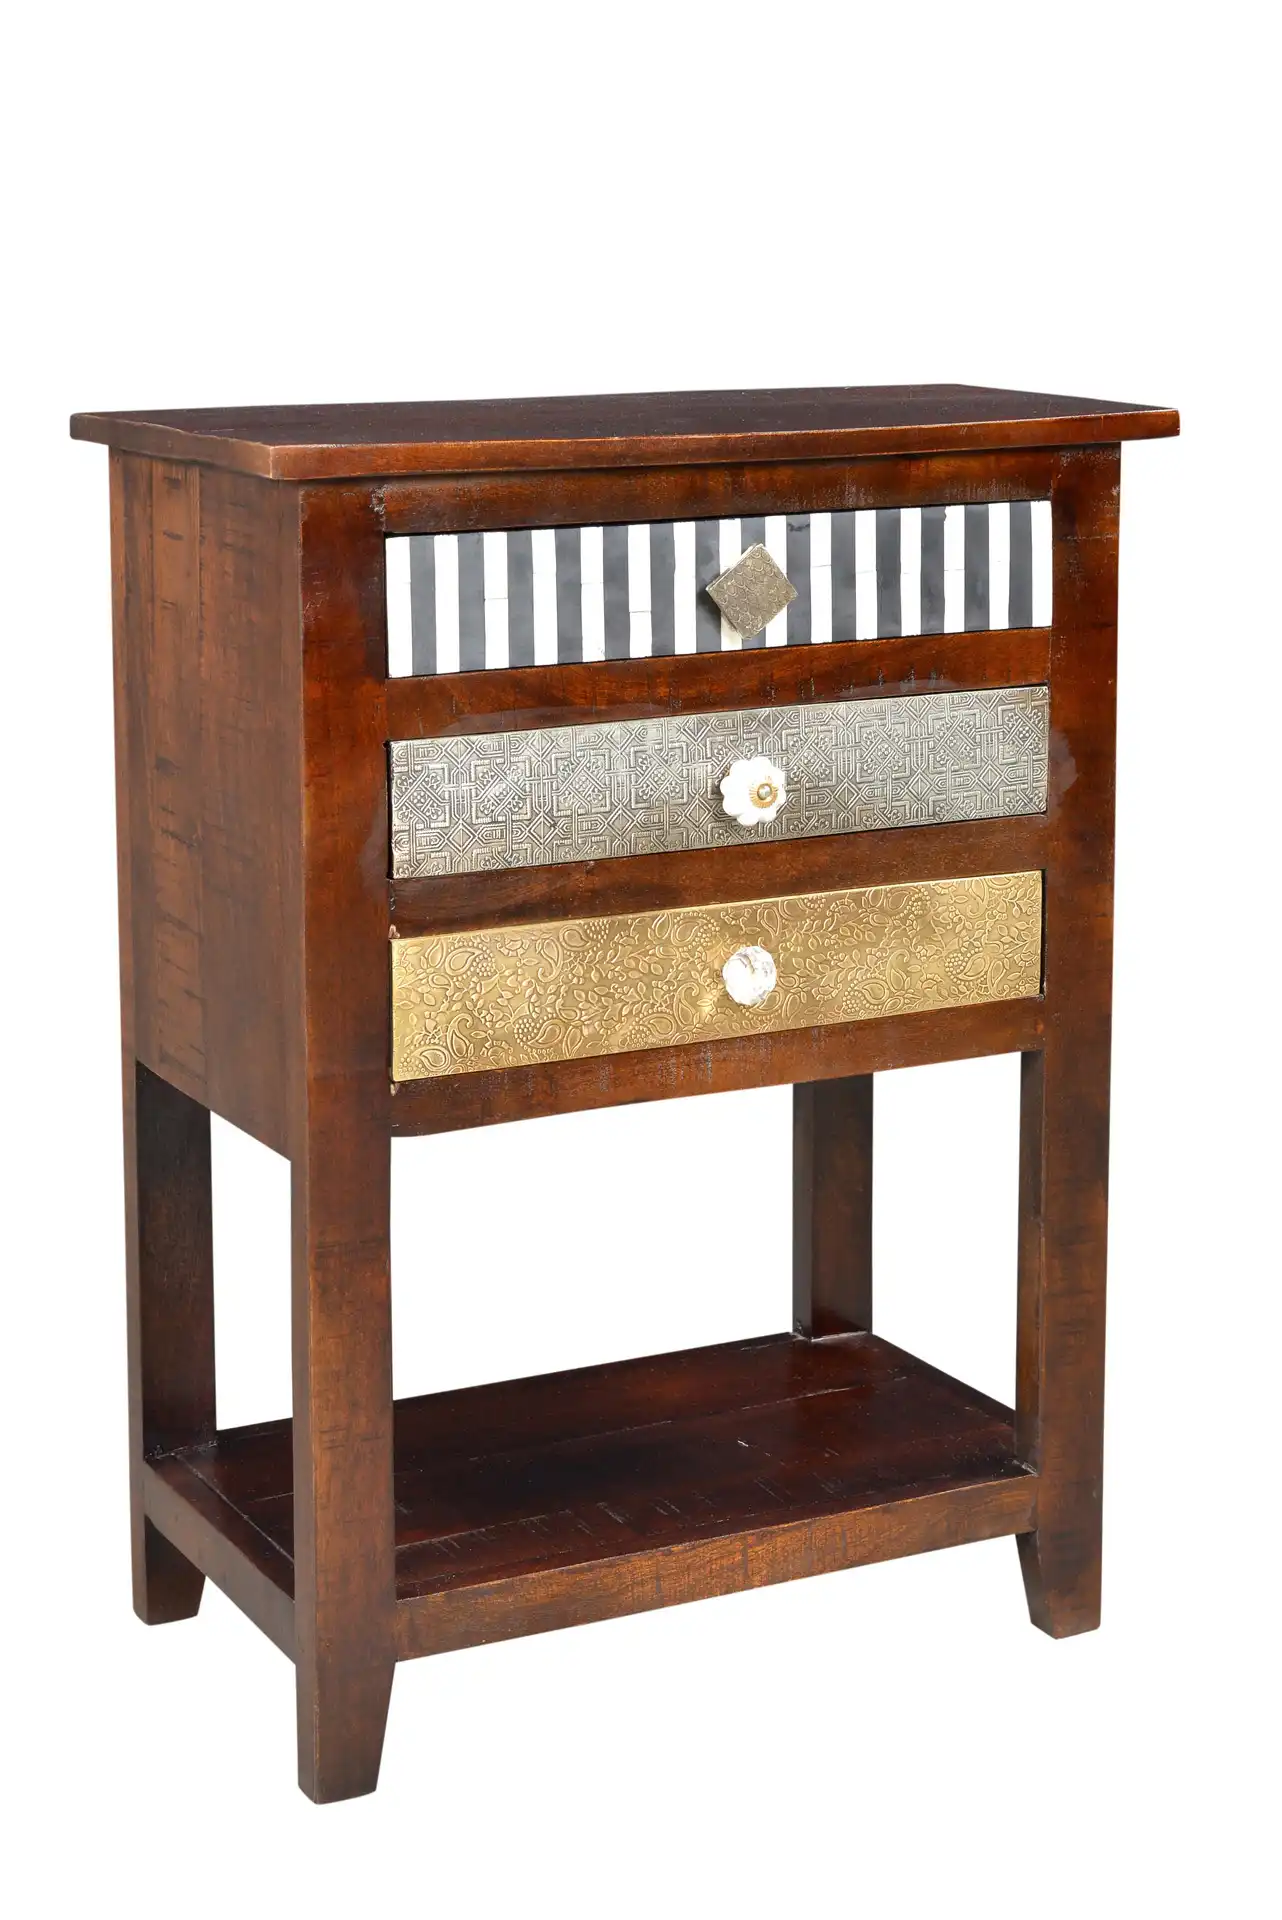 Wooden Side table with 3 Drawer - popular handicrafts